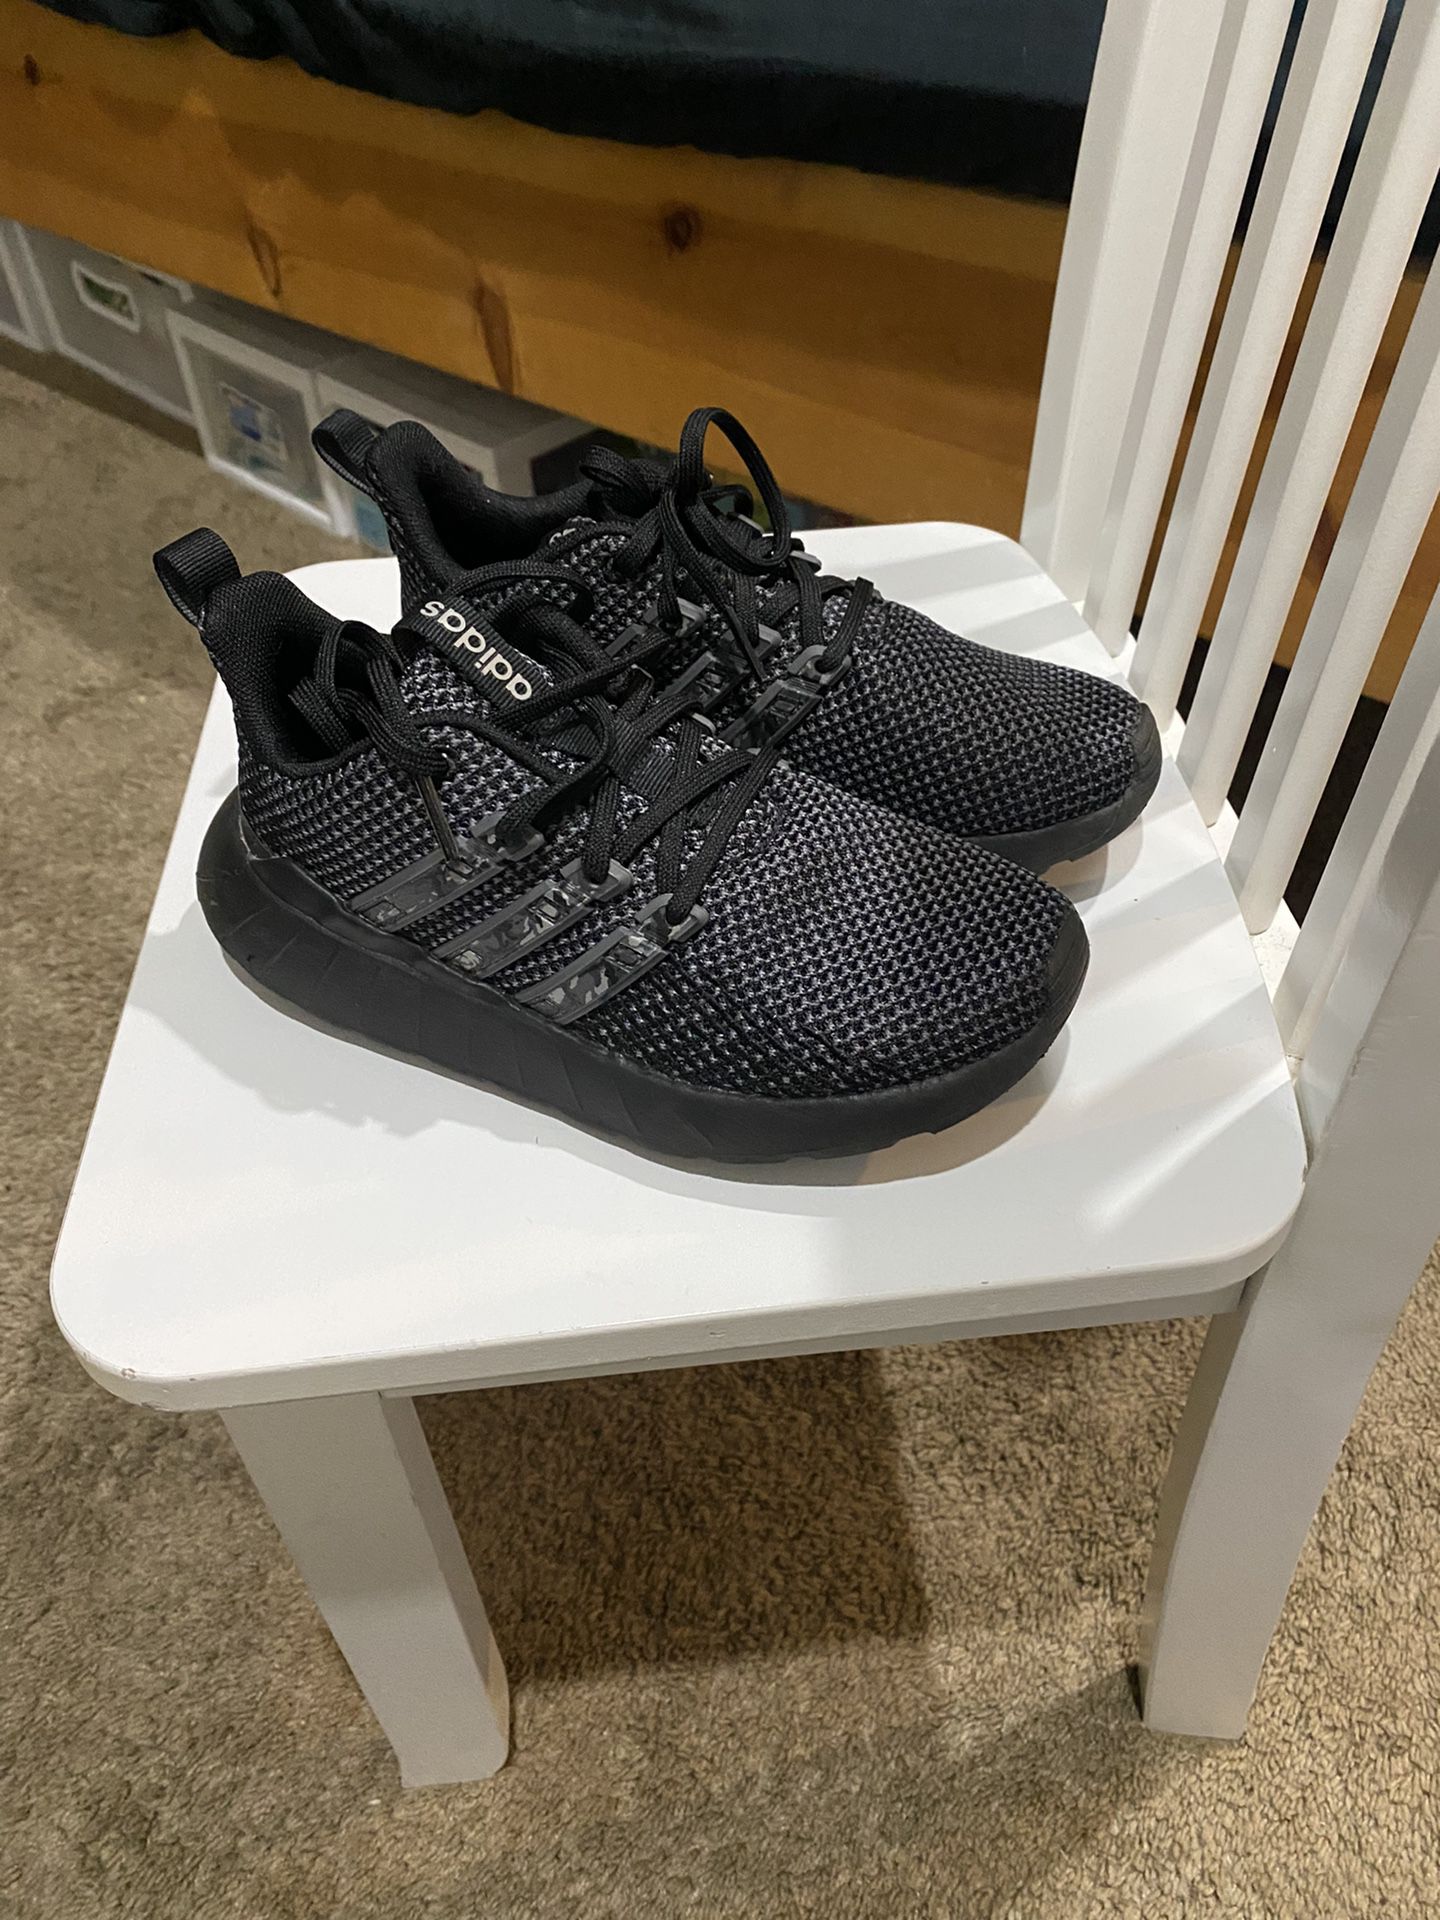 Youth Adidas Shoes Size 1 (worn 1 Time) 